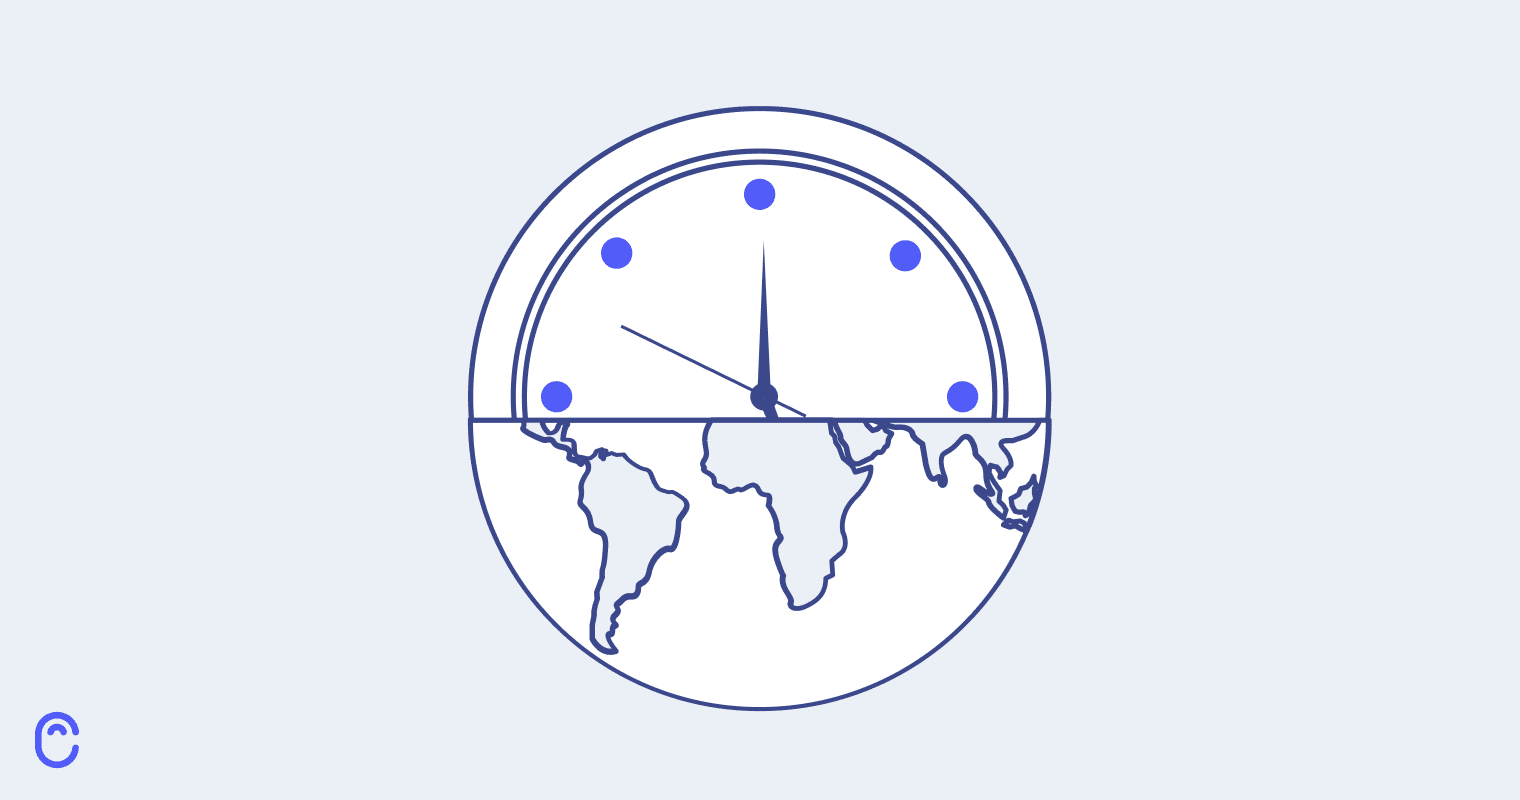 Project management across time zones: 7 lessons